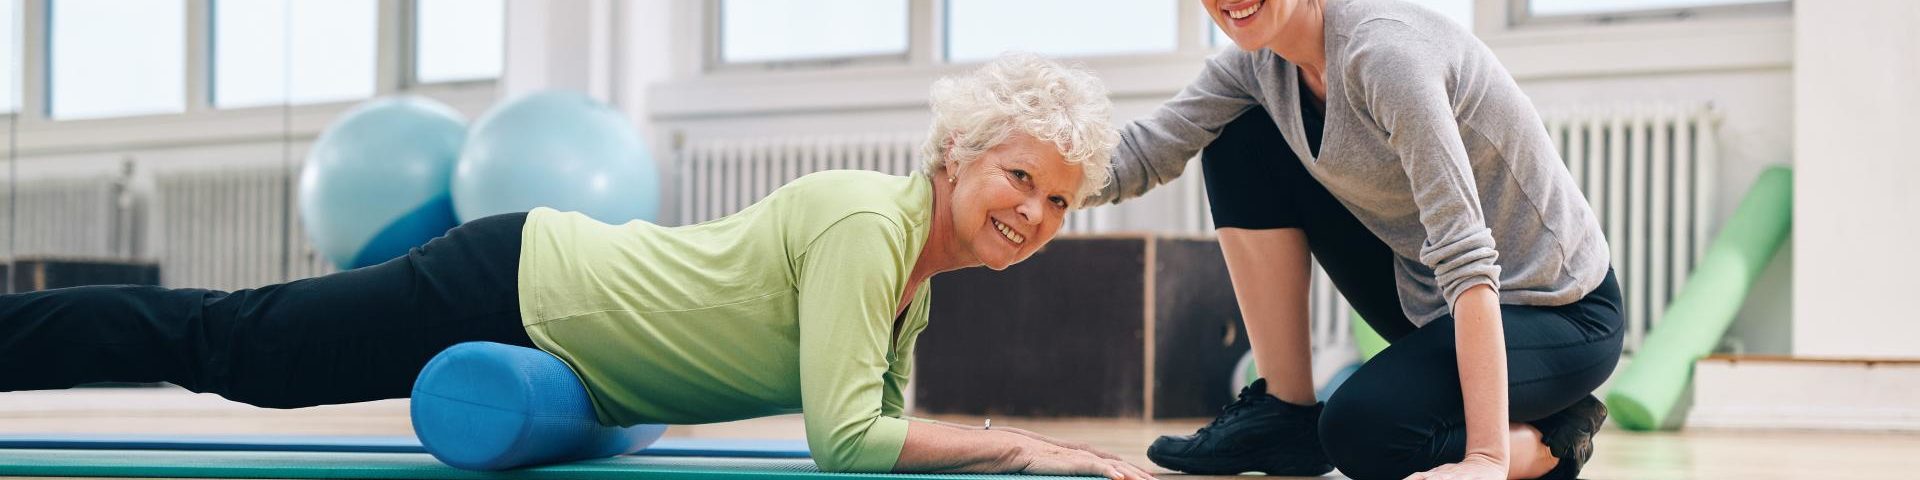 physical-therapist-assistant-helping-elderly-woman-in-her-workout